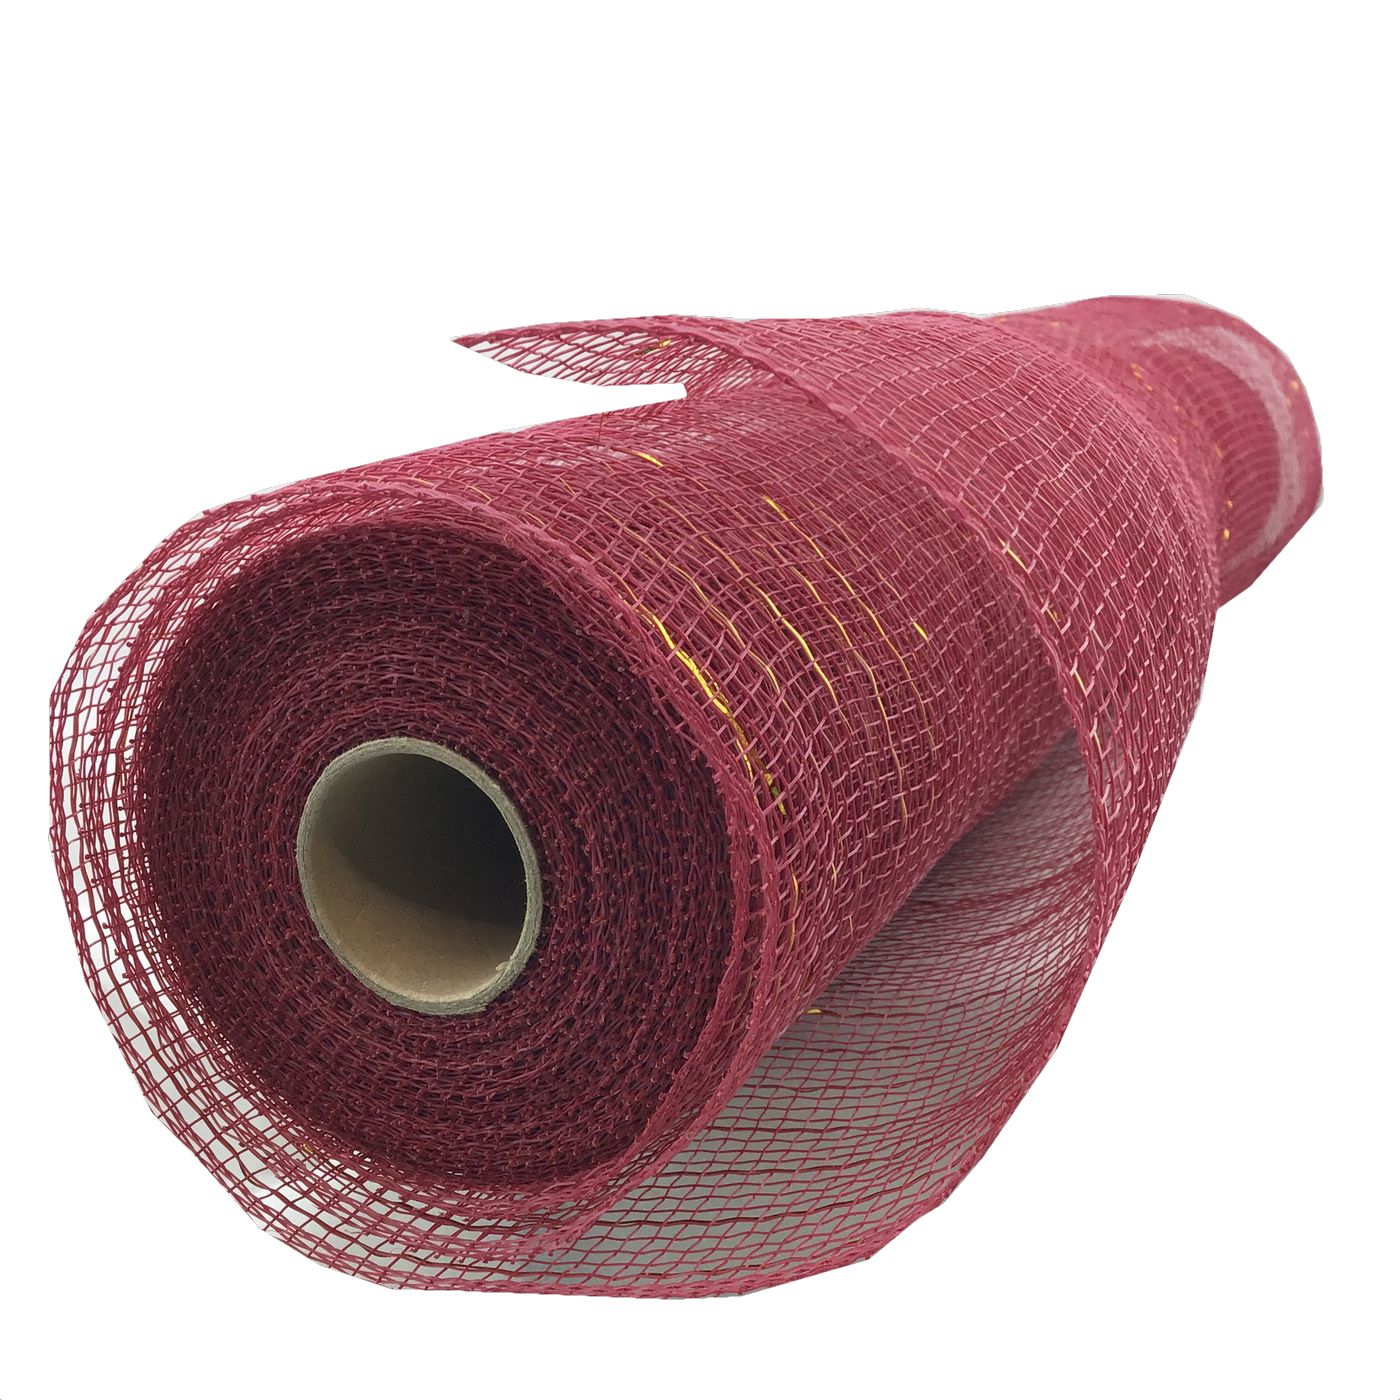 20 Inch by 10 Yards Designer Netting Burgundy with Gold Glamour